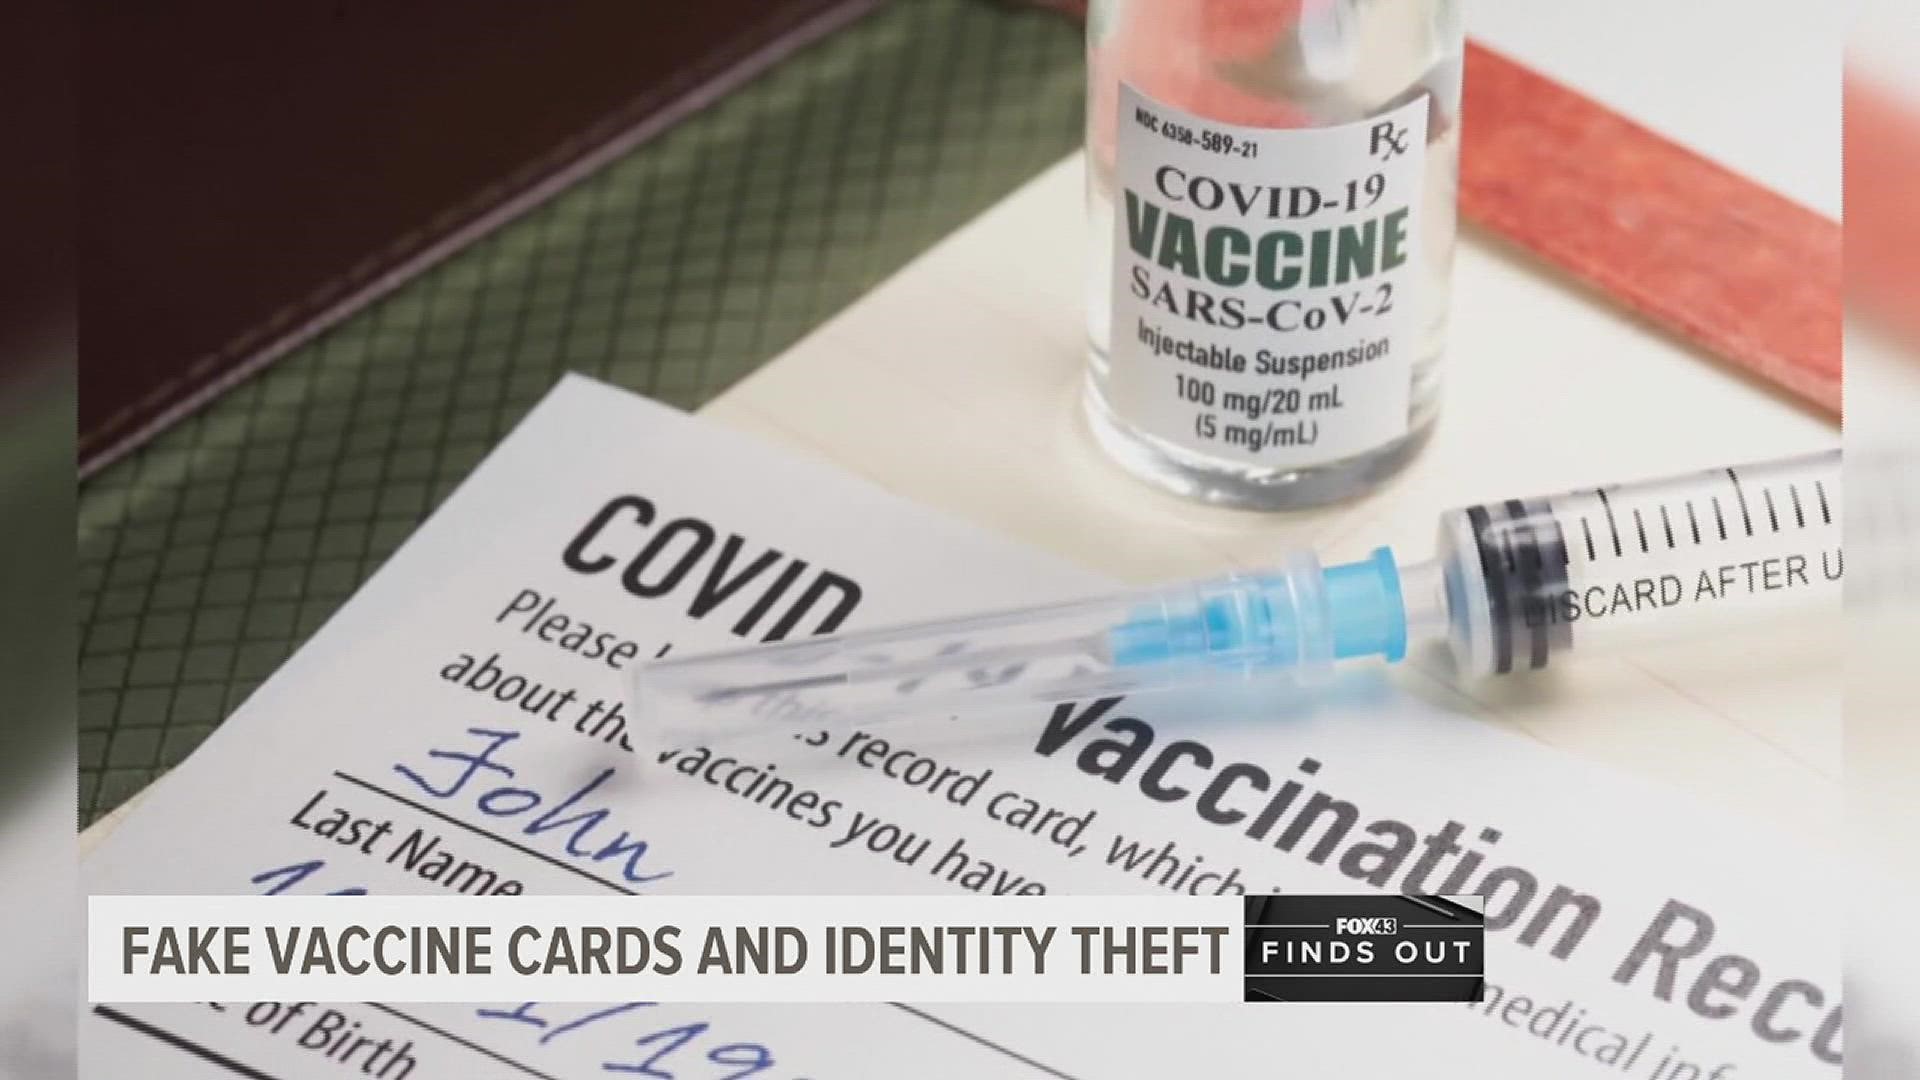 It's a crime to buy a fake vaccine card, make your own, or fill out a real card with false information.